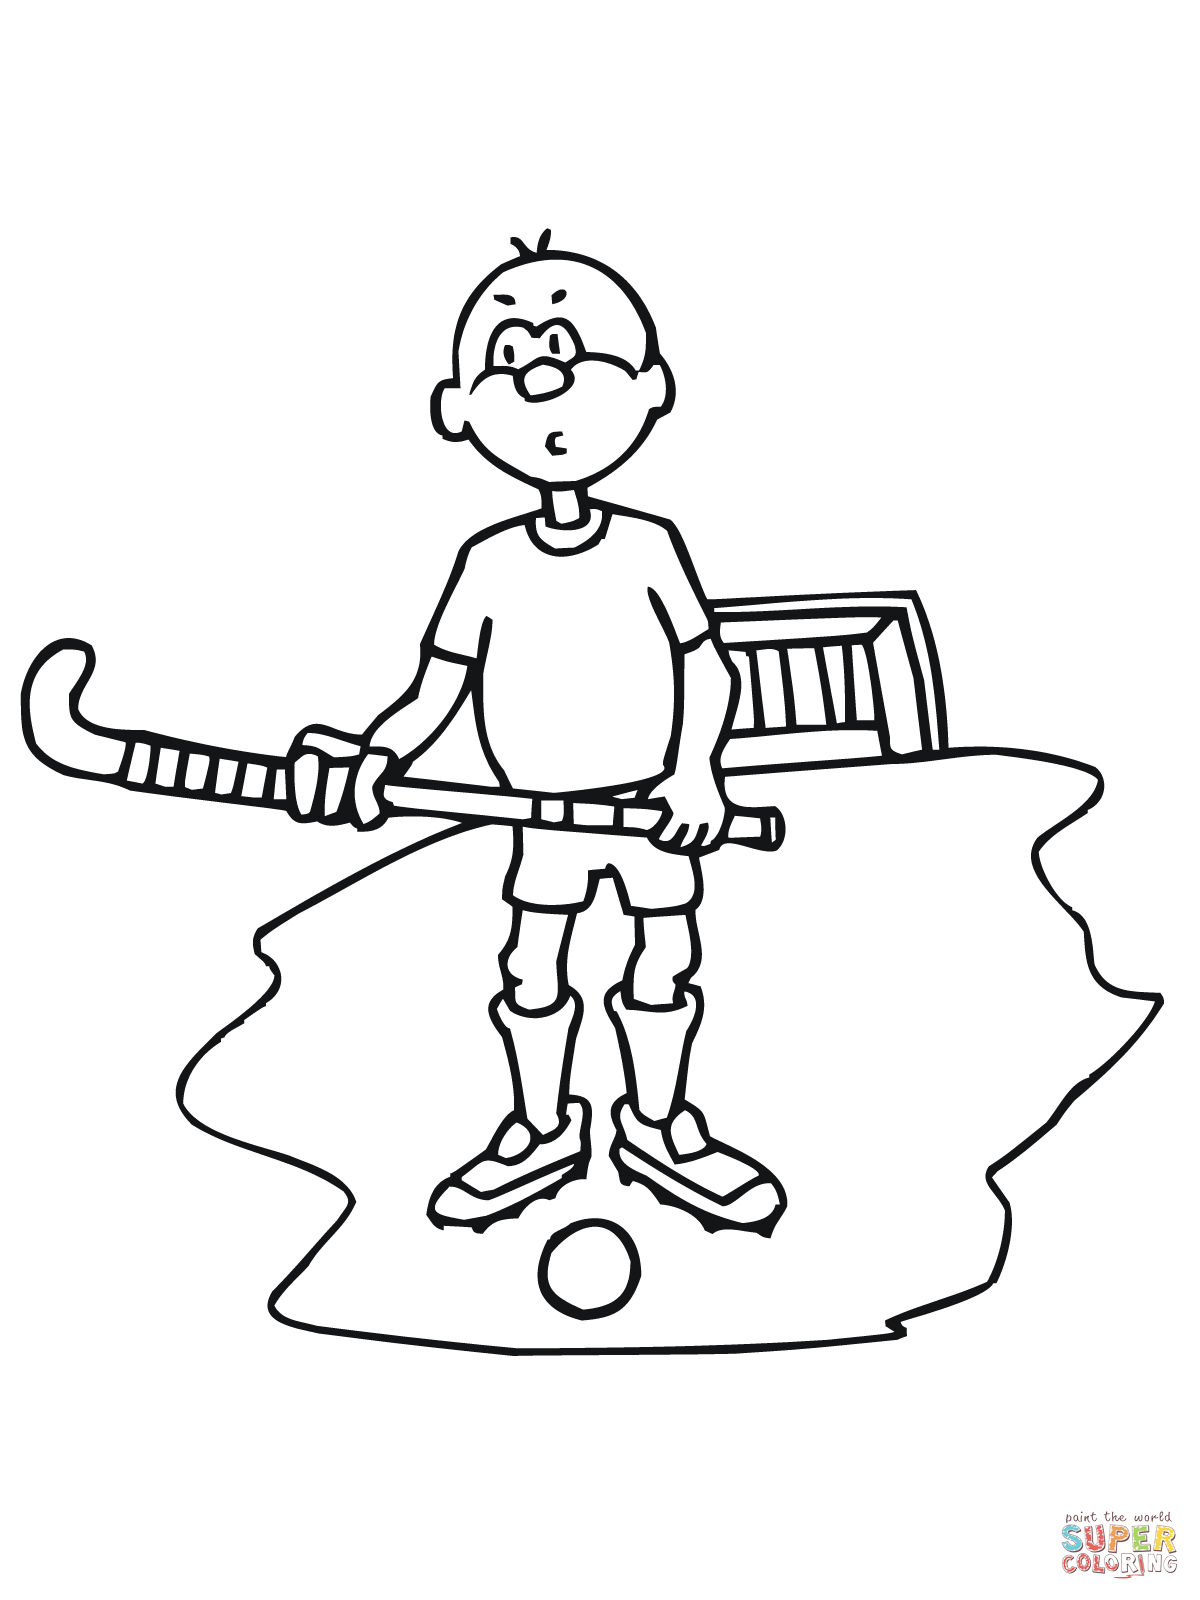 15 kids coloring pages field hockey - Print Color Craft